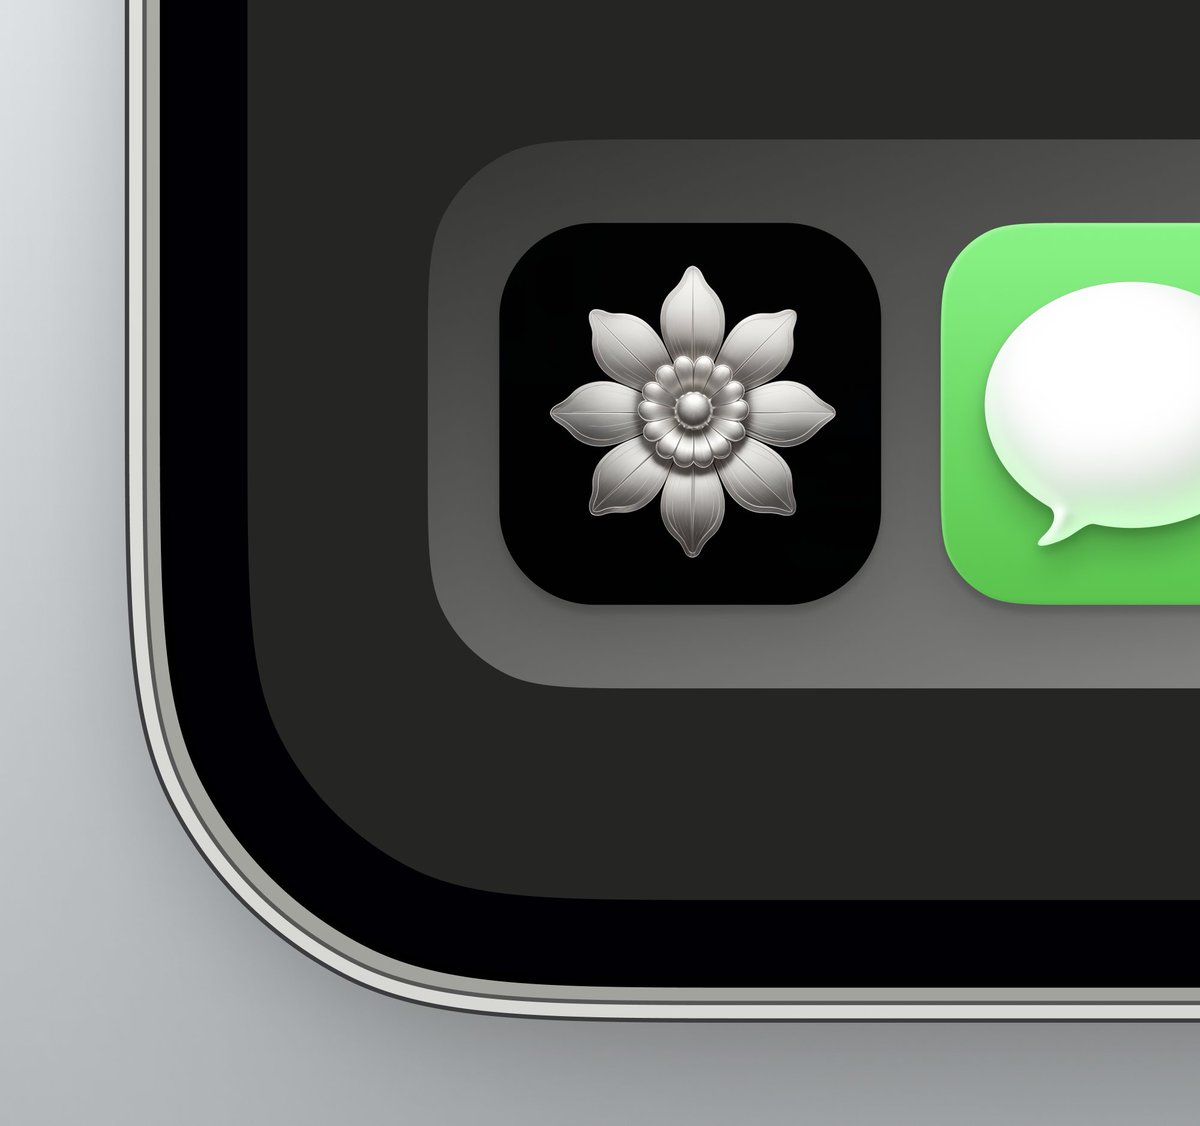 Exploring a new app icon. What do you think?